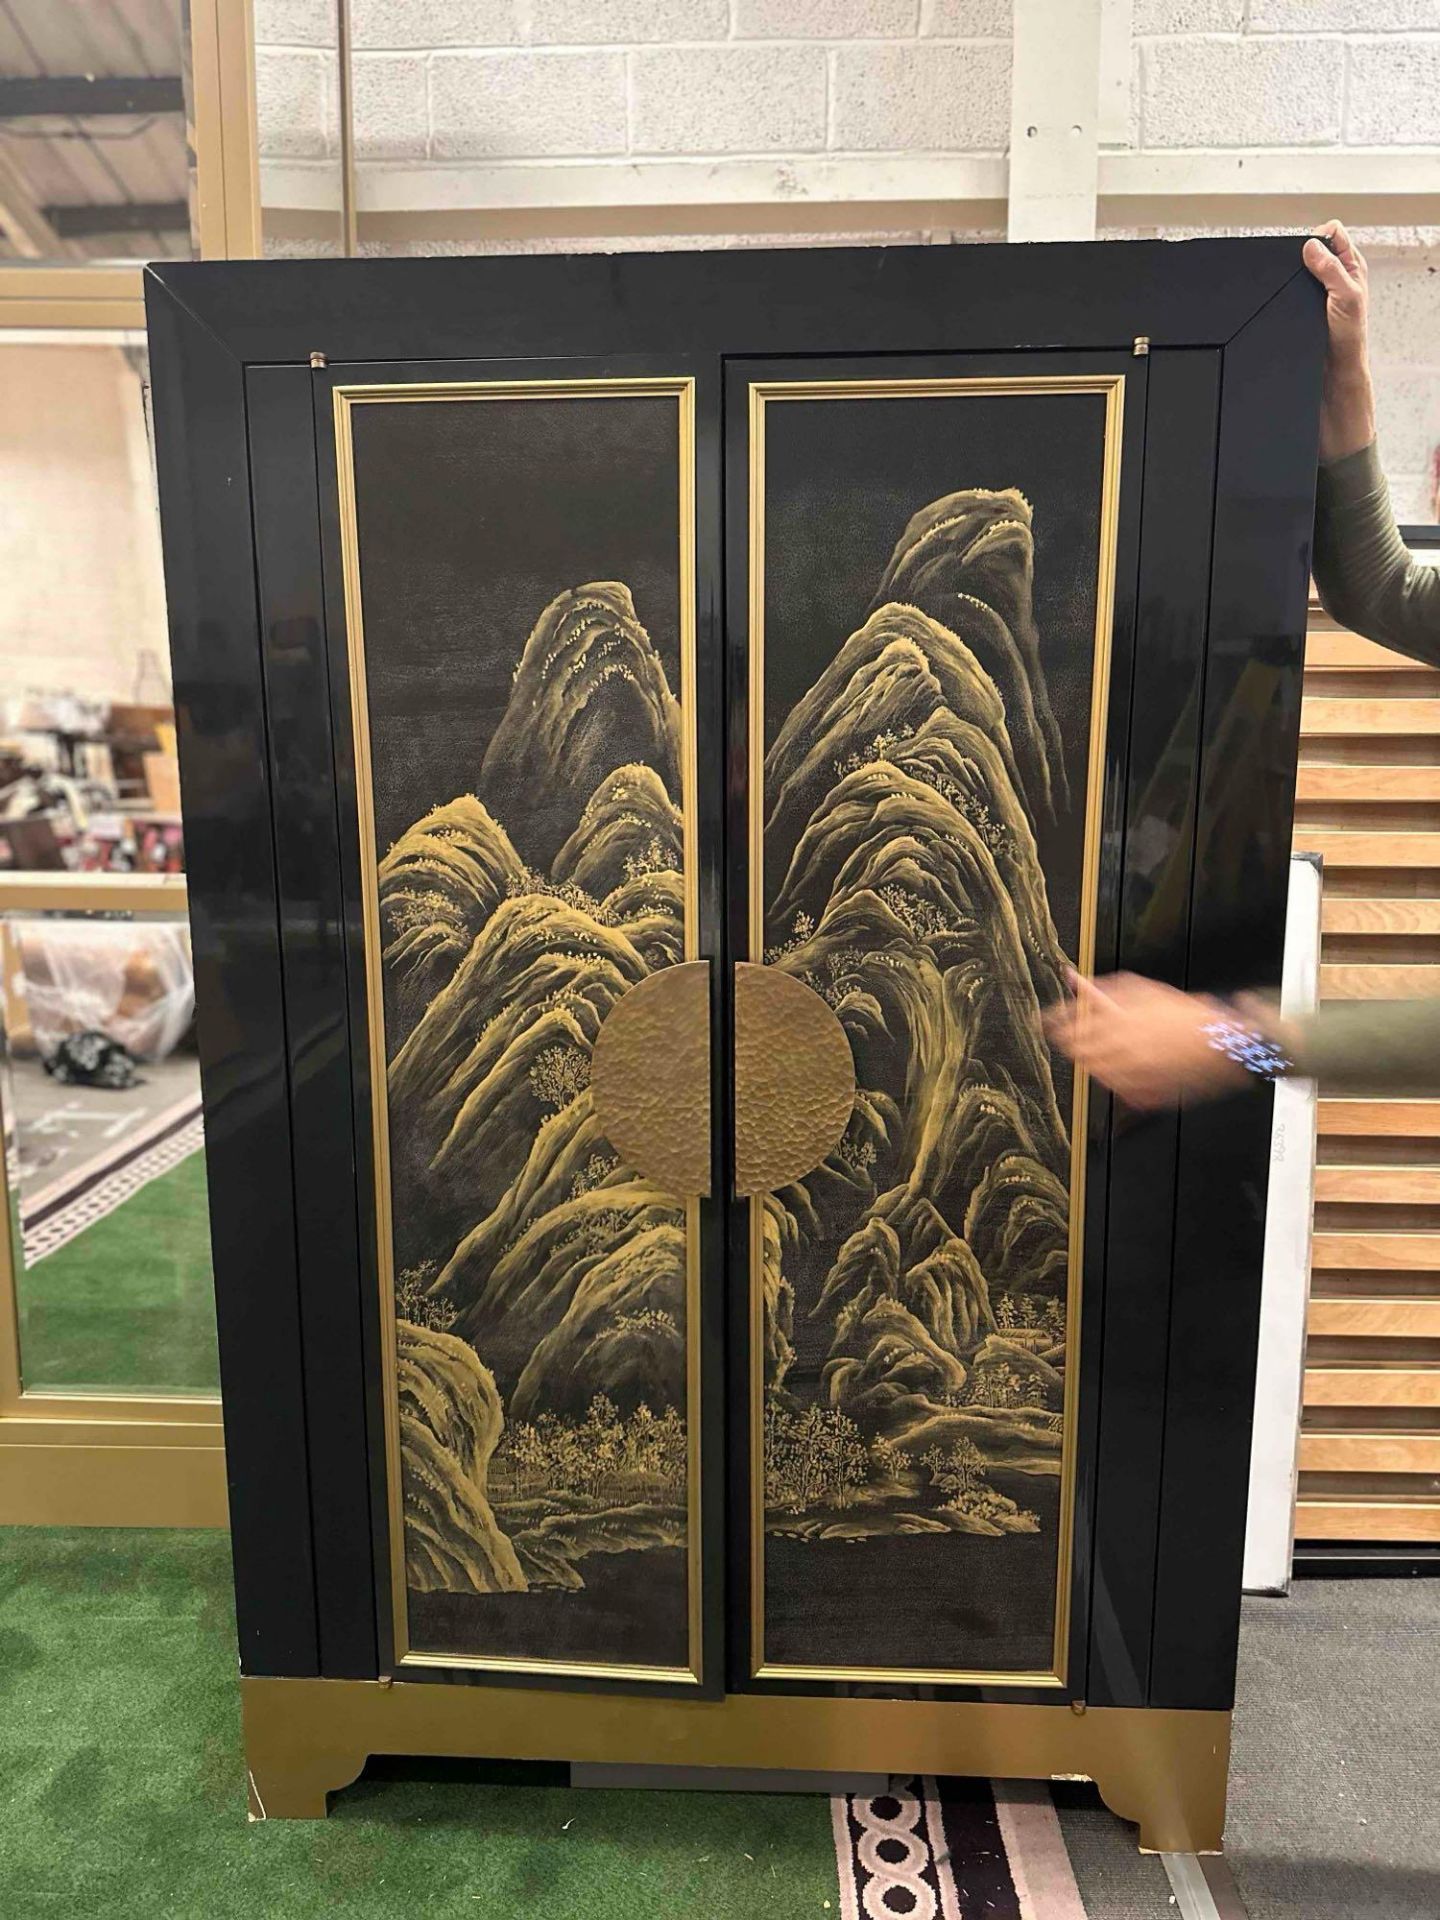 Black And Gold Cocktail Cabinet With Mirrored Back Drawers And Mini Bar Fridge Door, Glass And - Image 5 of 10